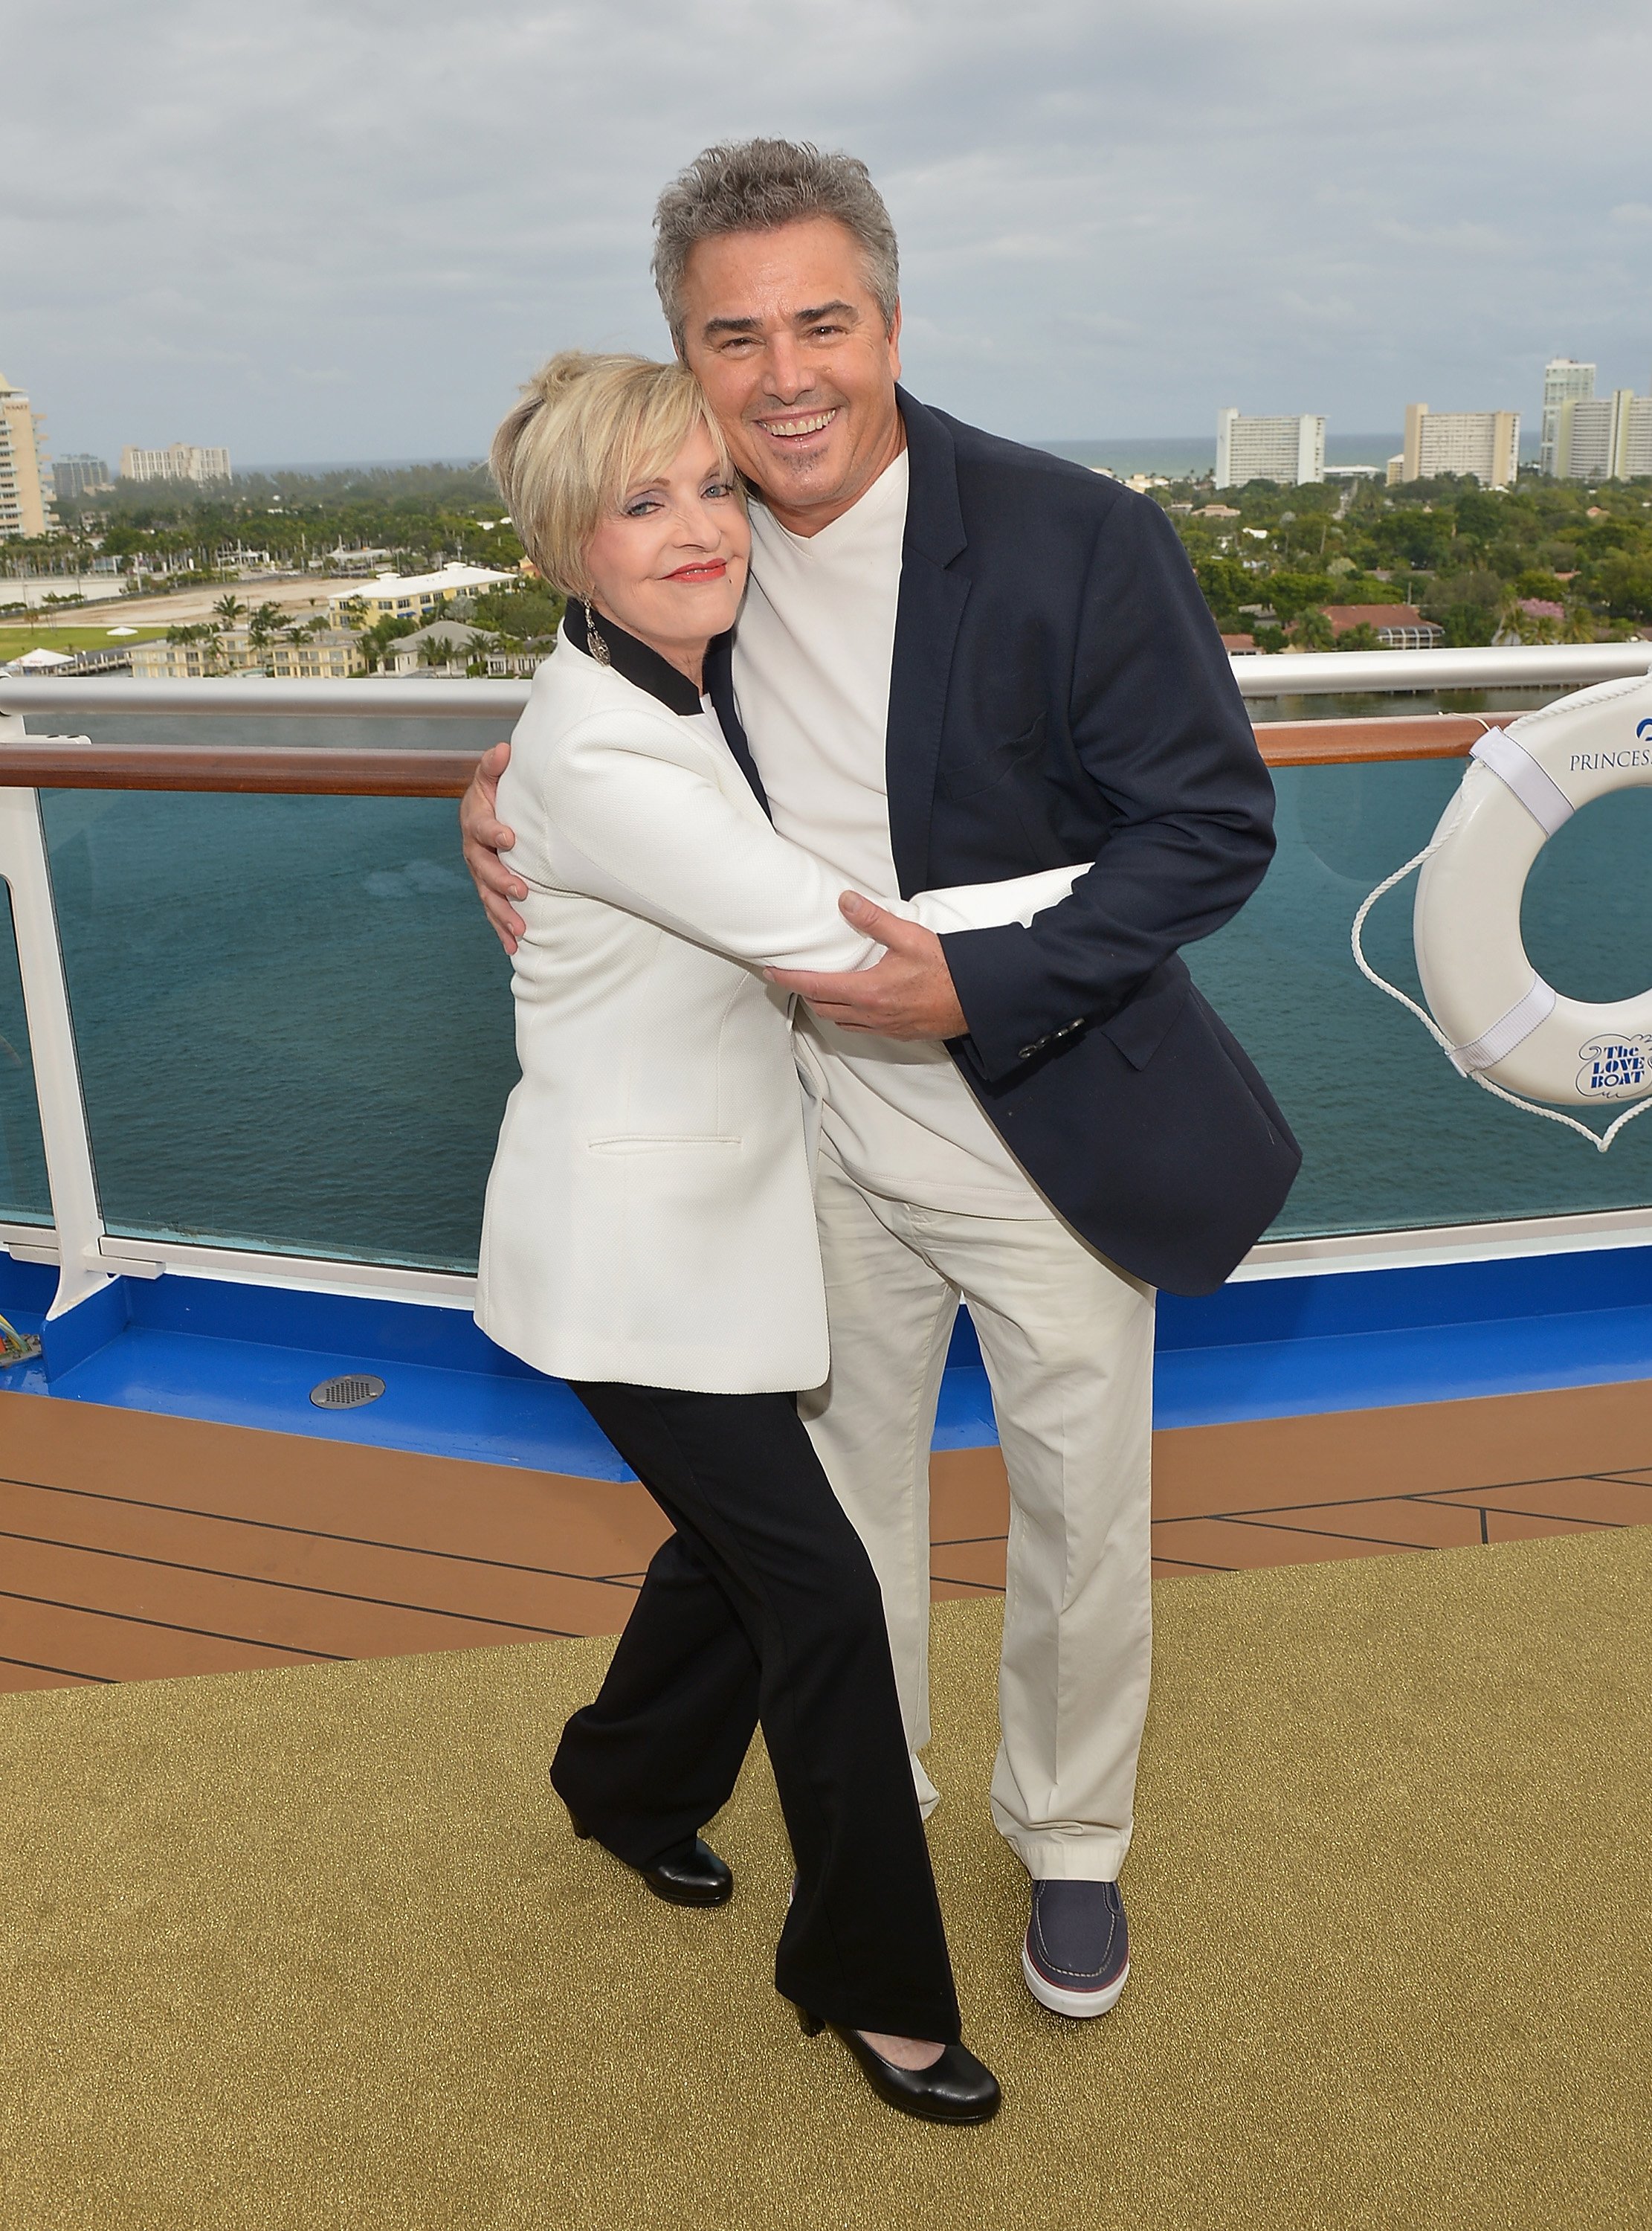 Florence Henderson and Christopher Knight at the Love Boat Cast Christening Of Regal Princess Cruise Ship, 2014, Fort Lauderdale, Florida. | Photo: Getty Images